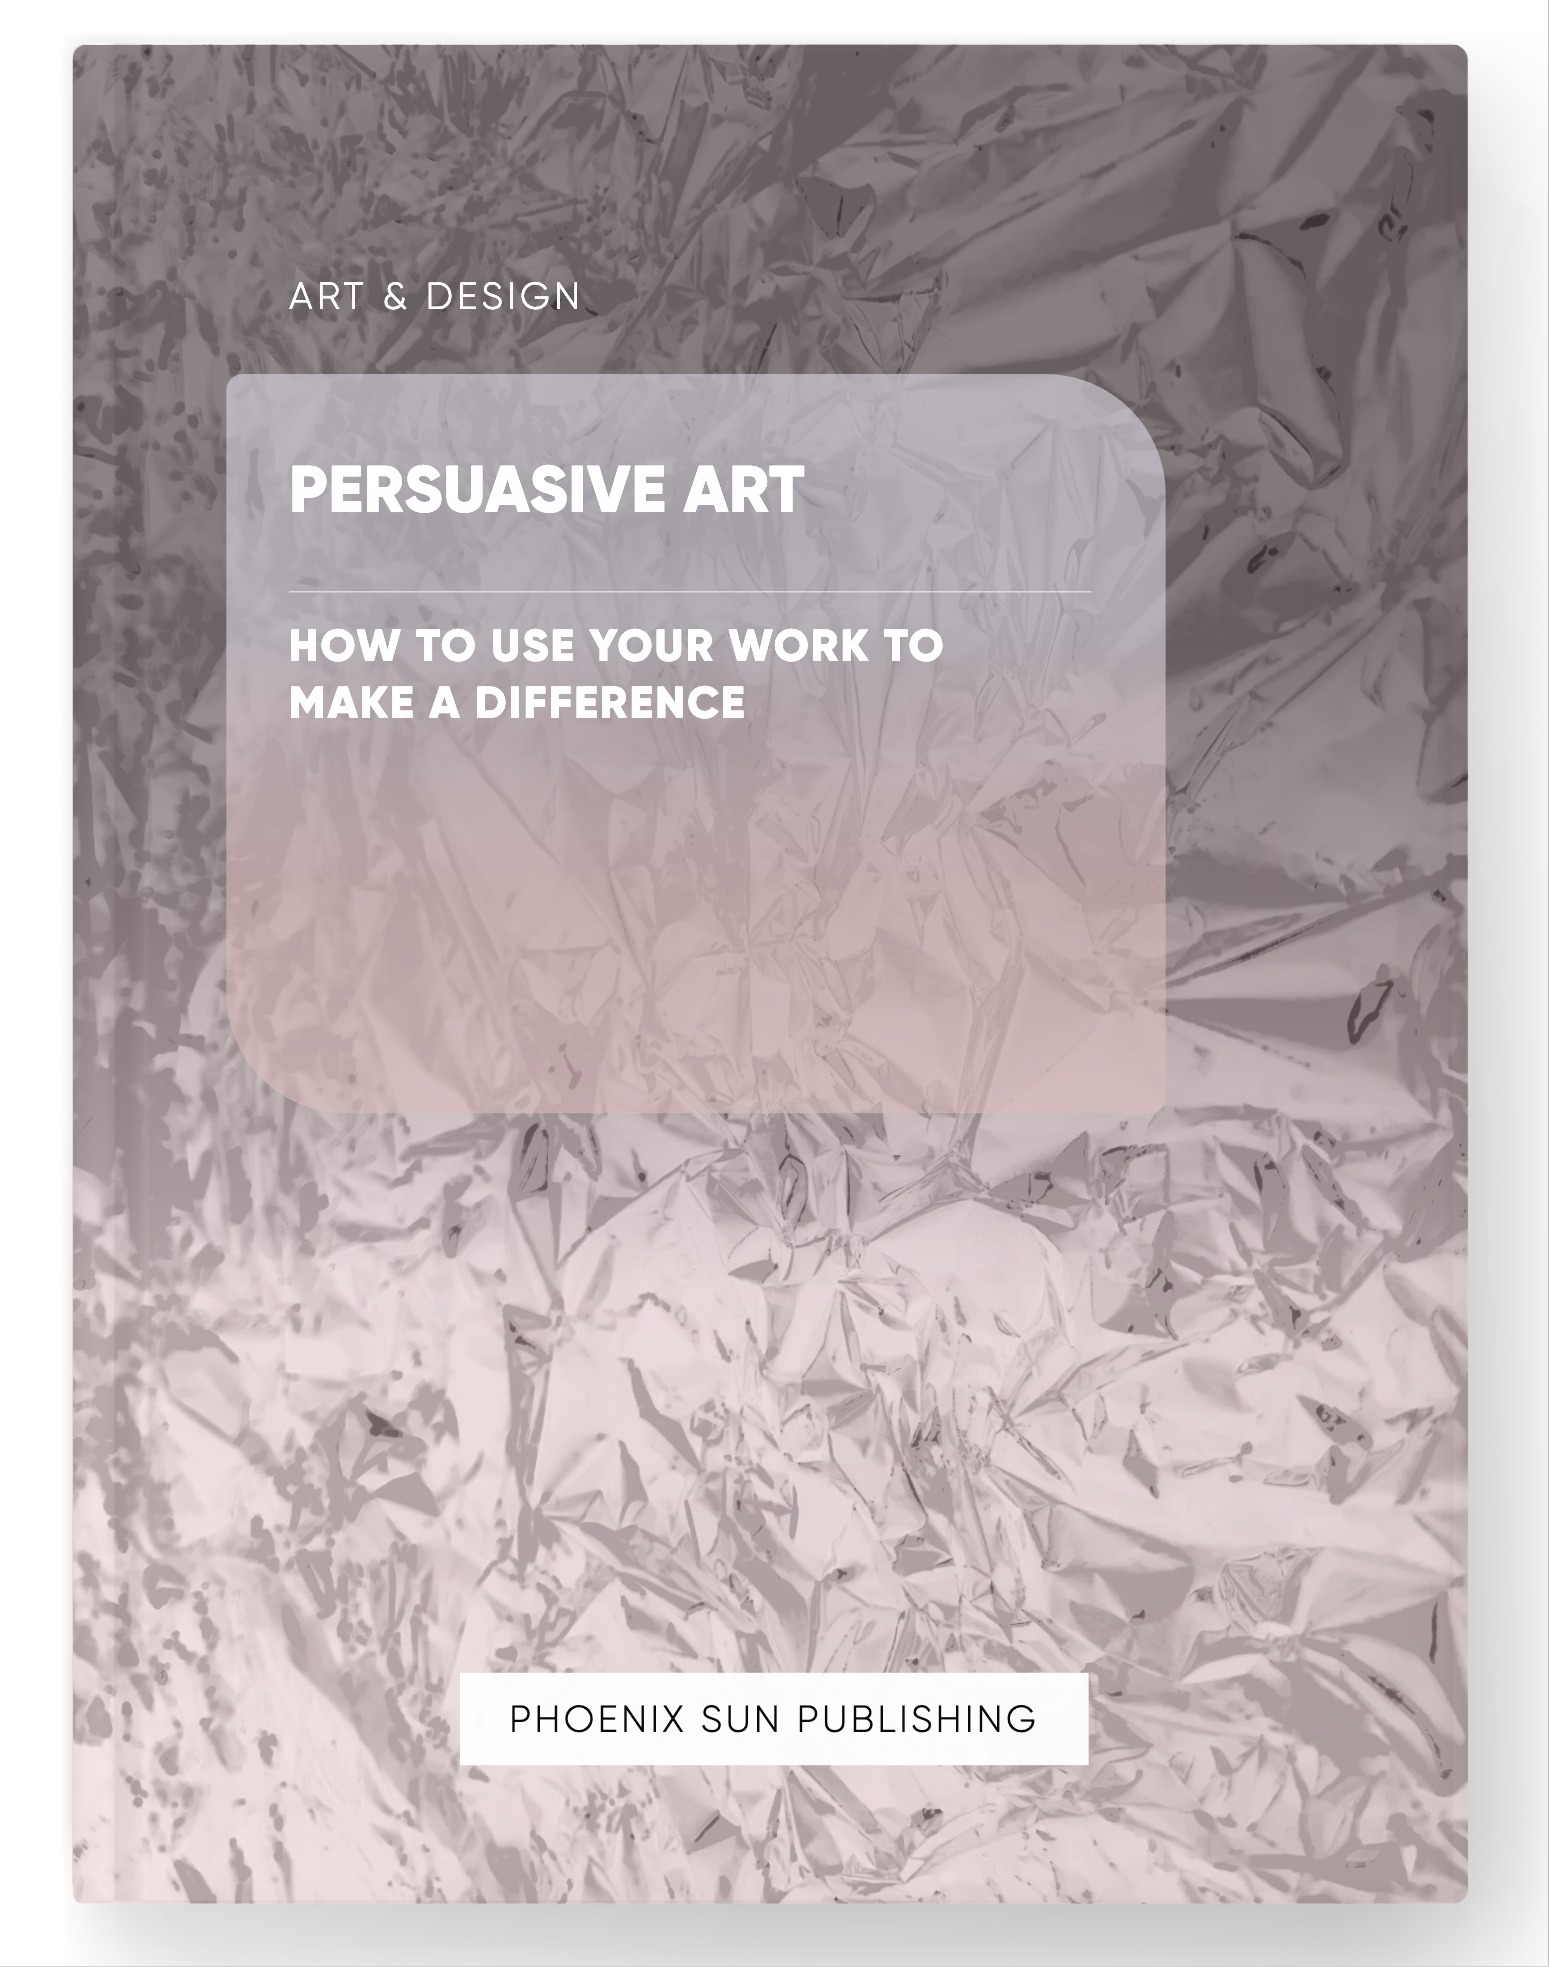 Persuasive Art – How to Use Your Work to Make a Difference